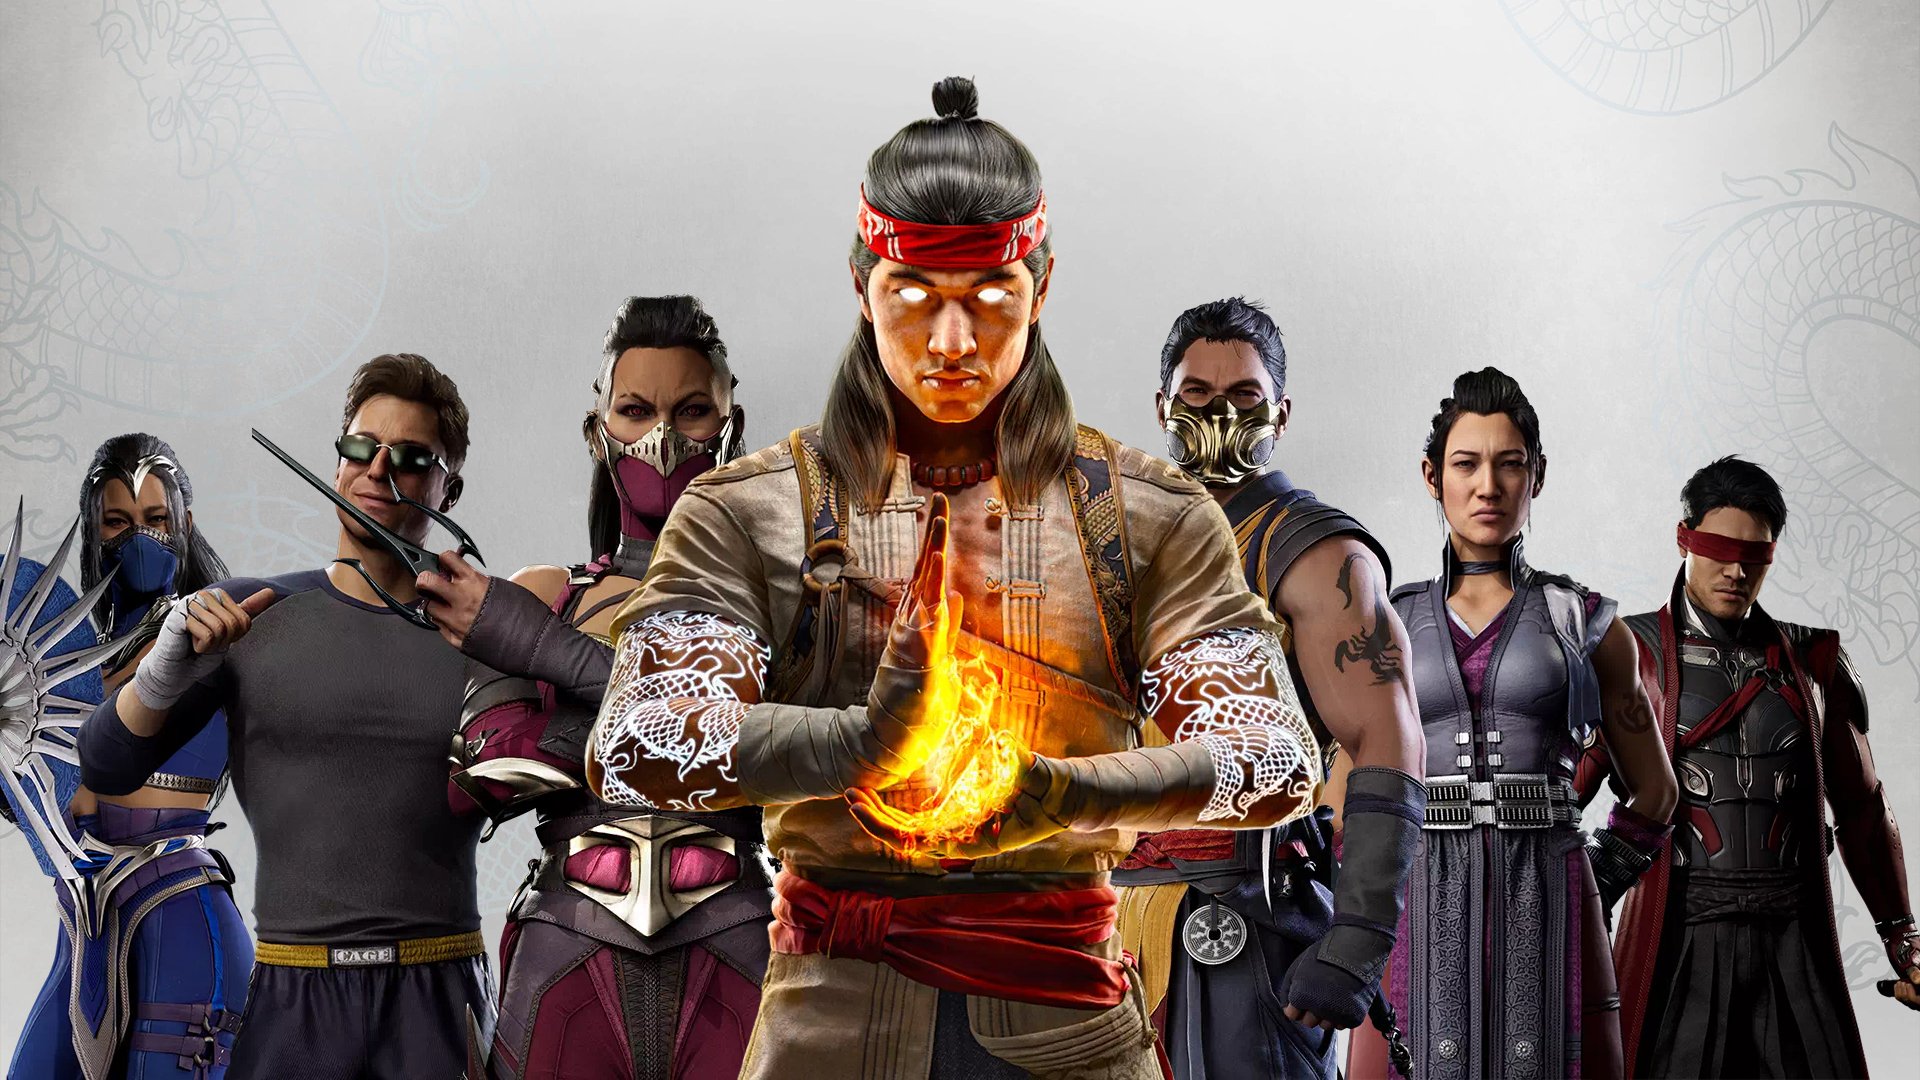 Mortal Kombat 1 adds three more characters to its roster — Maxi-Geek